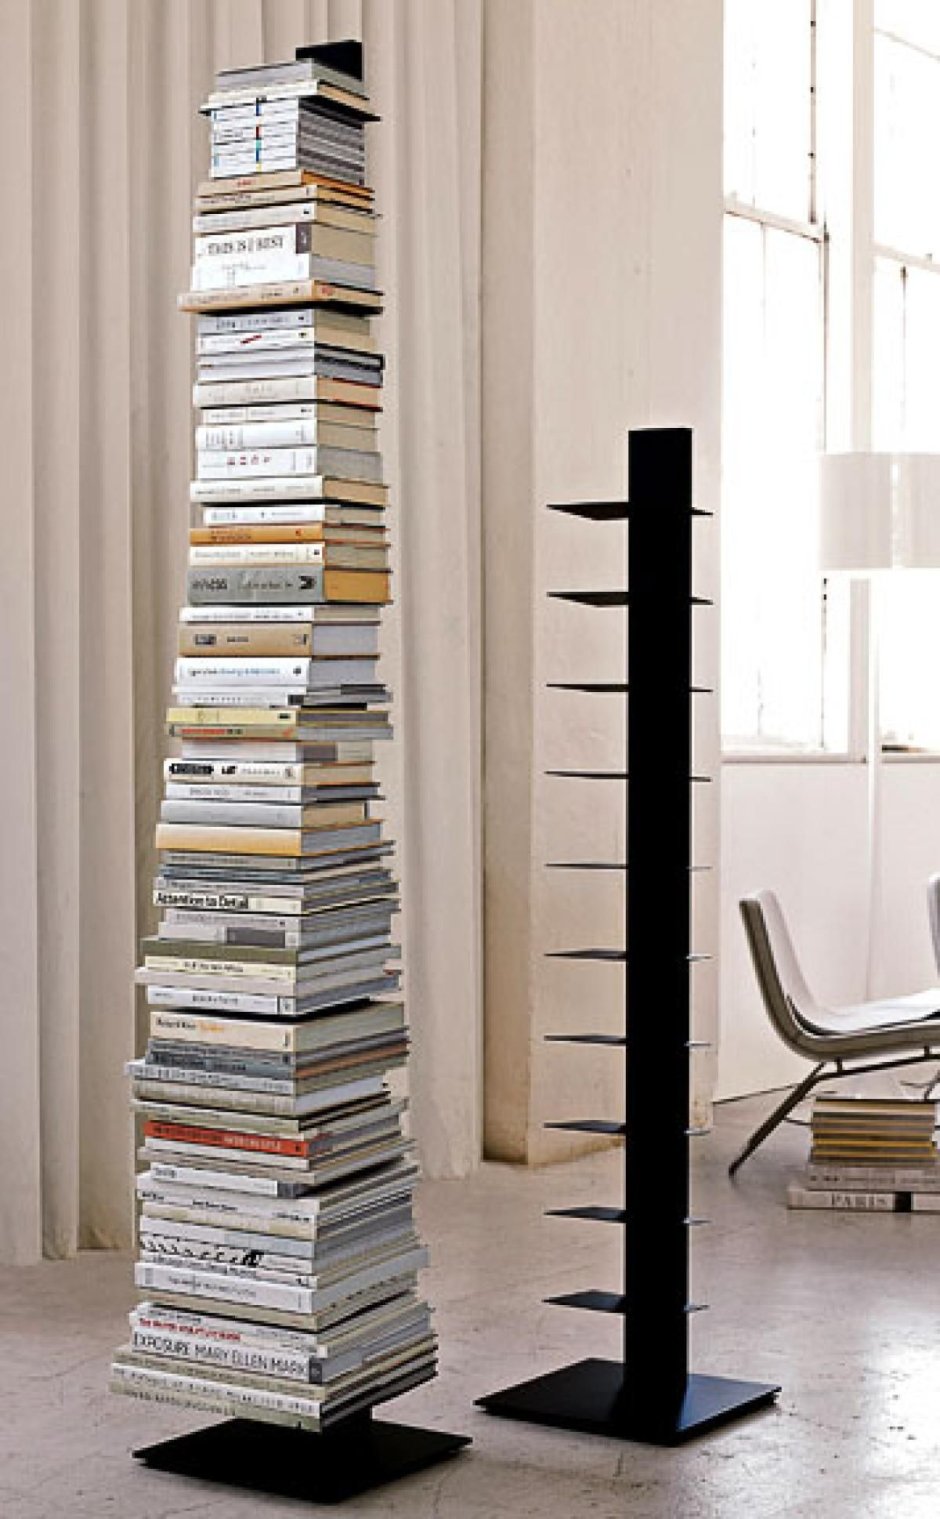 Ikea Spine Tower book